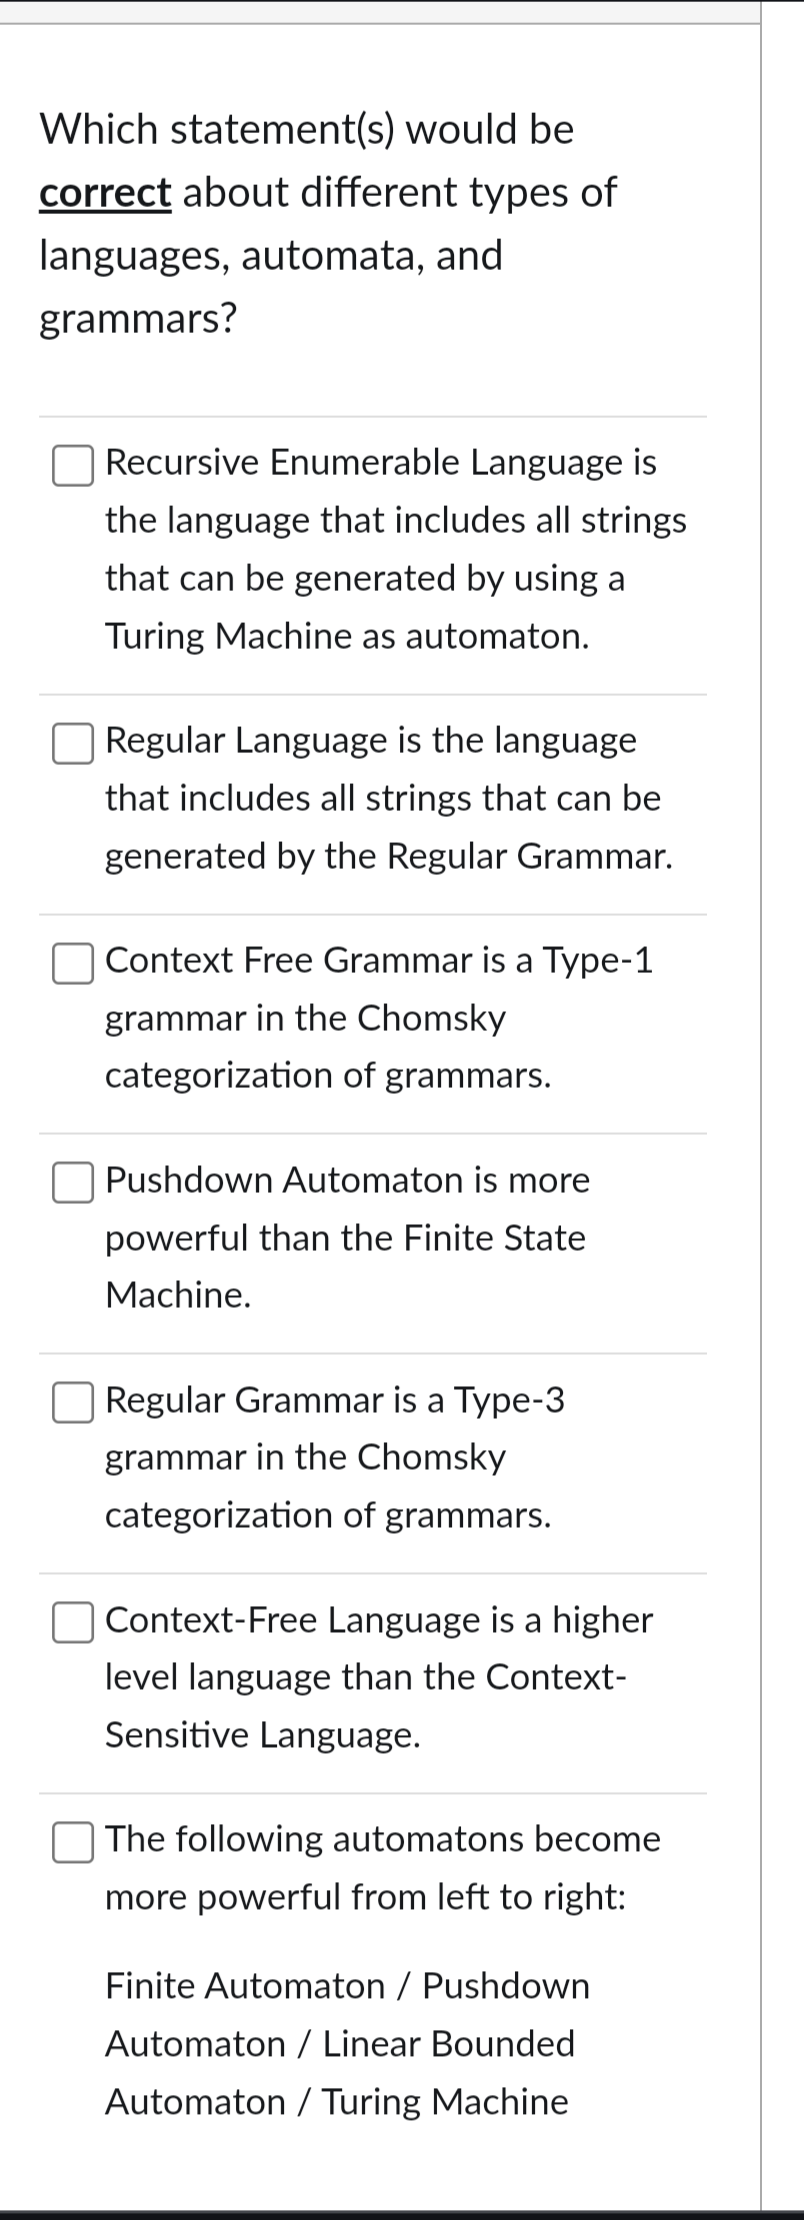 Which statement(s) would be
correct about different types of
languages, automata, and
grammars?
Recursive Enumerable Language is
the language that includes all strings
that can be generated by using a
Turing Machine as automaton.
Regular Language is the language
that includes all strings that can be
generated by the Regular Grammar.
Context Free Grammar is a Type-1
grammar in the Chomsky
categorization of grammars.
Pushdown Automaton is more
powerful than the Finite State
Machine.
Regular Grammar is a Type-3
grammar in the Chomsky
categorization of grammars.
Context-Free Language is a higher
level language than the Context-
Sensitive Language.
The following automatons become
more powerful from left to right:
Finite Automaton / Pushdown
Automaton / Linear Bounded
Automaton / Turing Machine